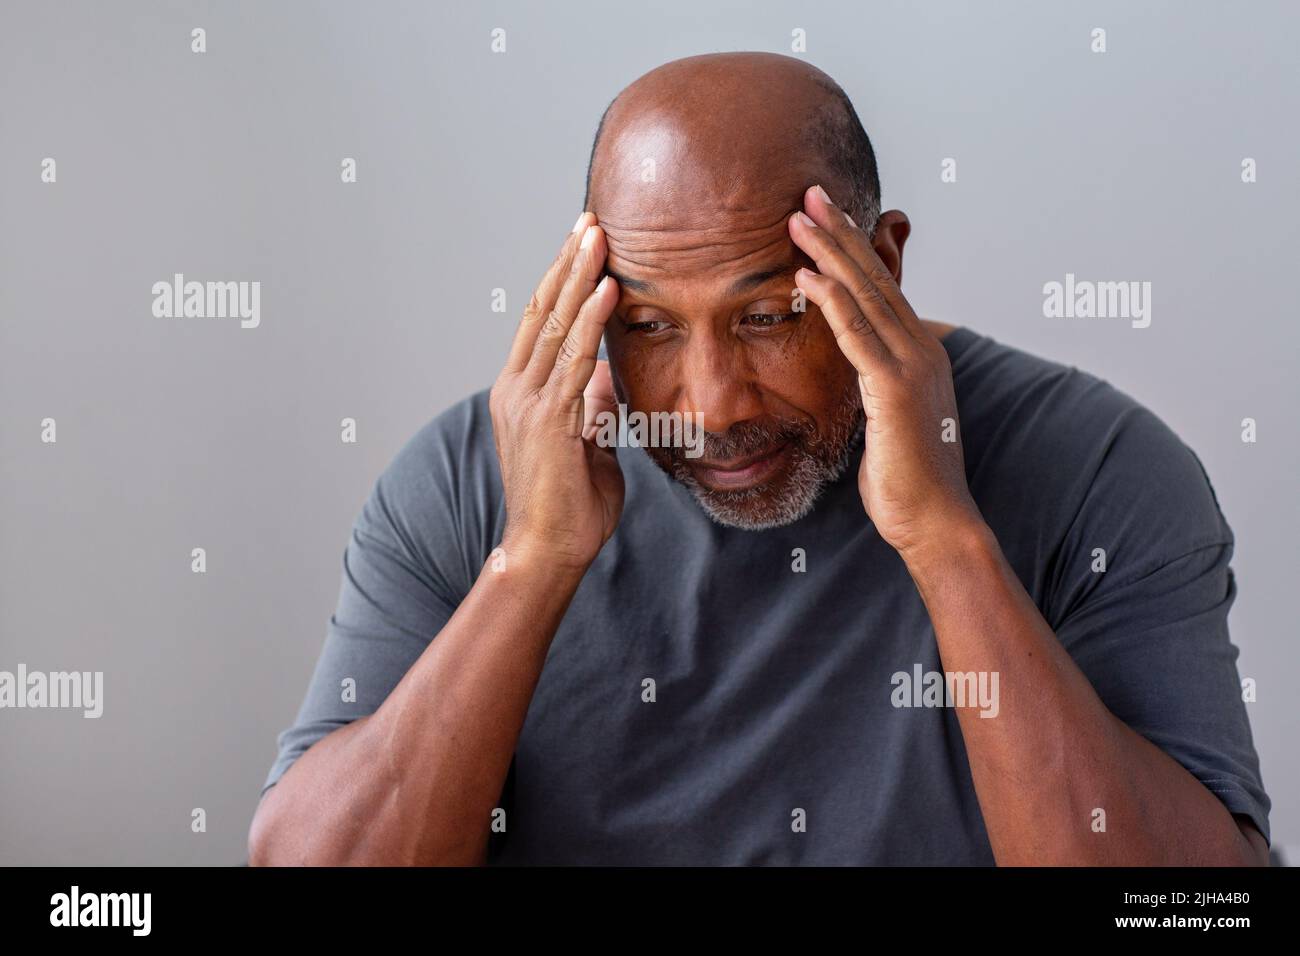 Older man not feeling well and having a headache. Stock Photo